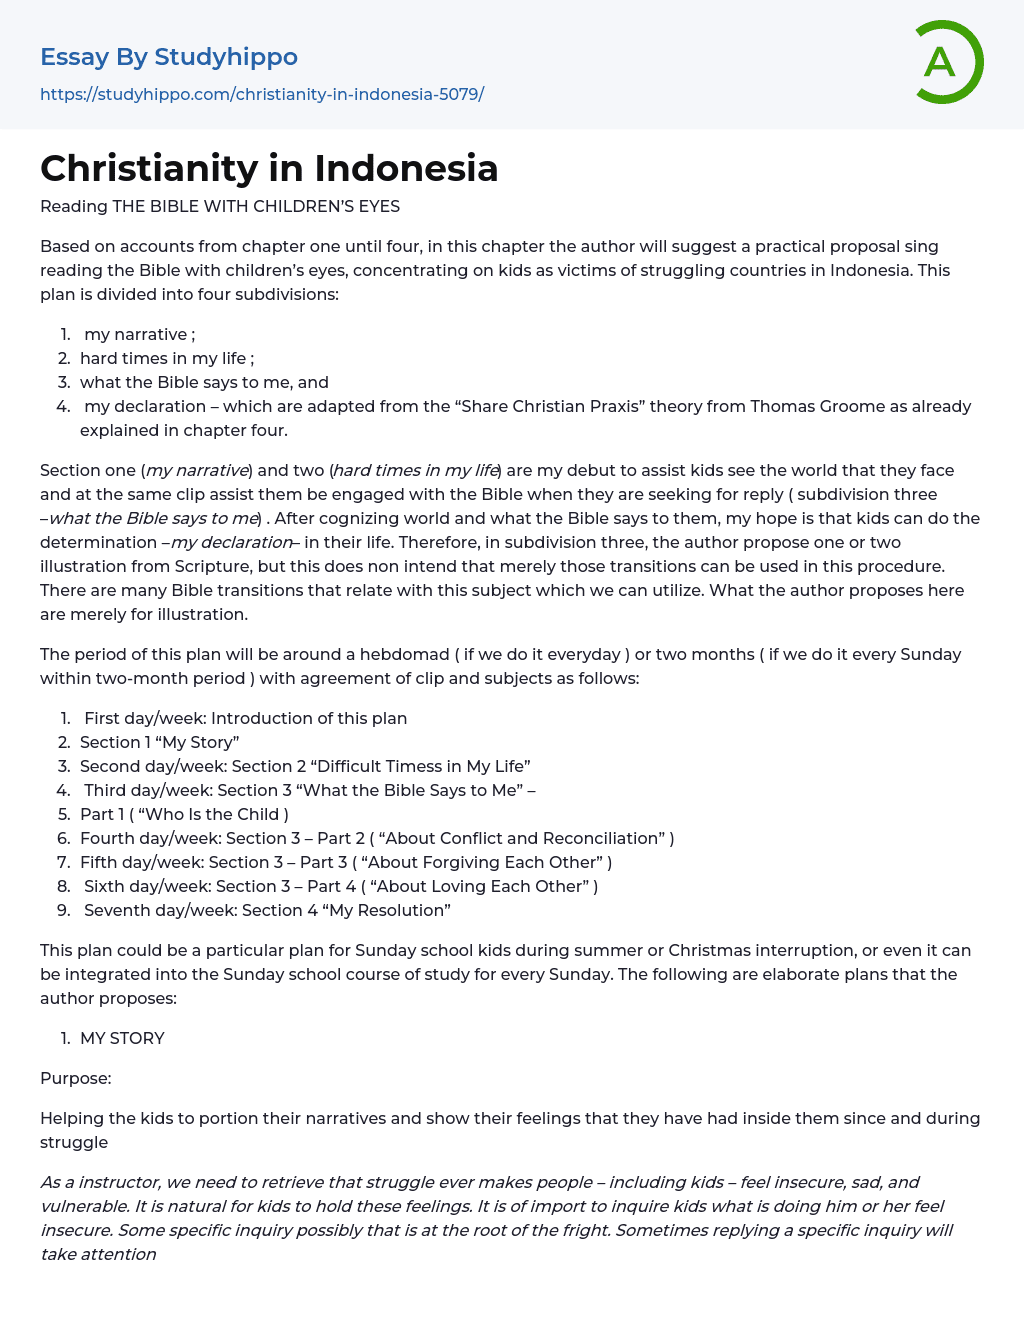 Christianity in Indonesia Essay Example